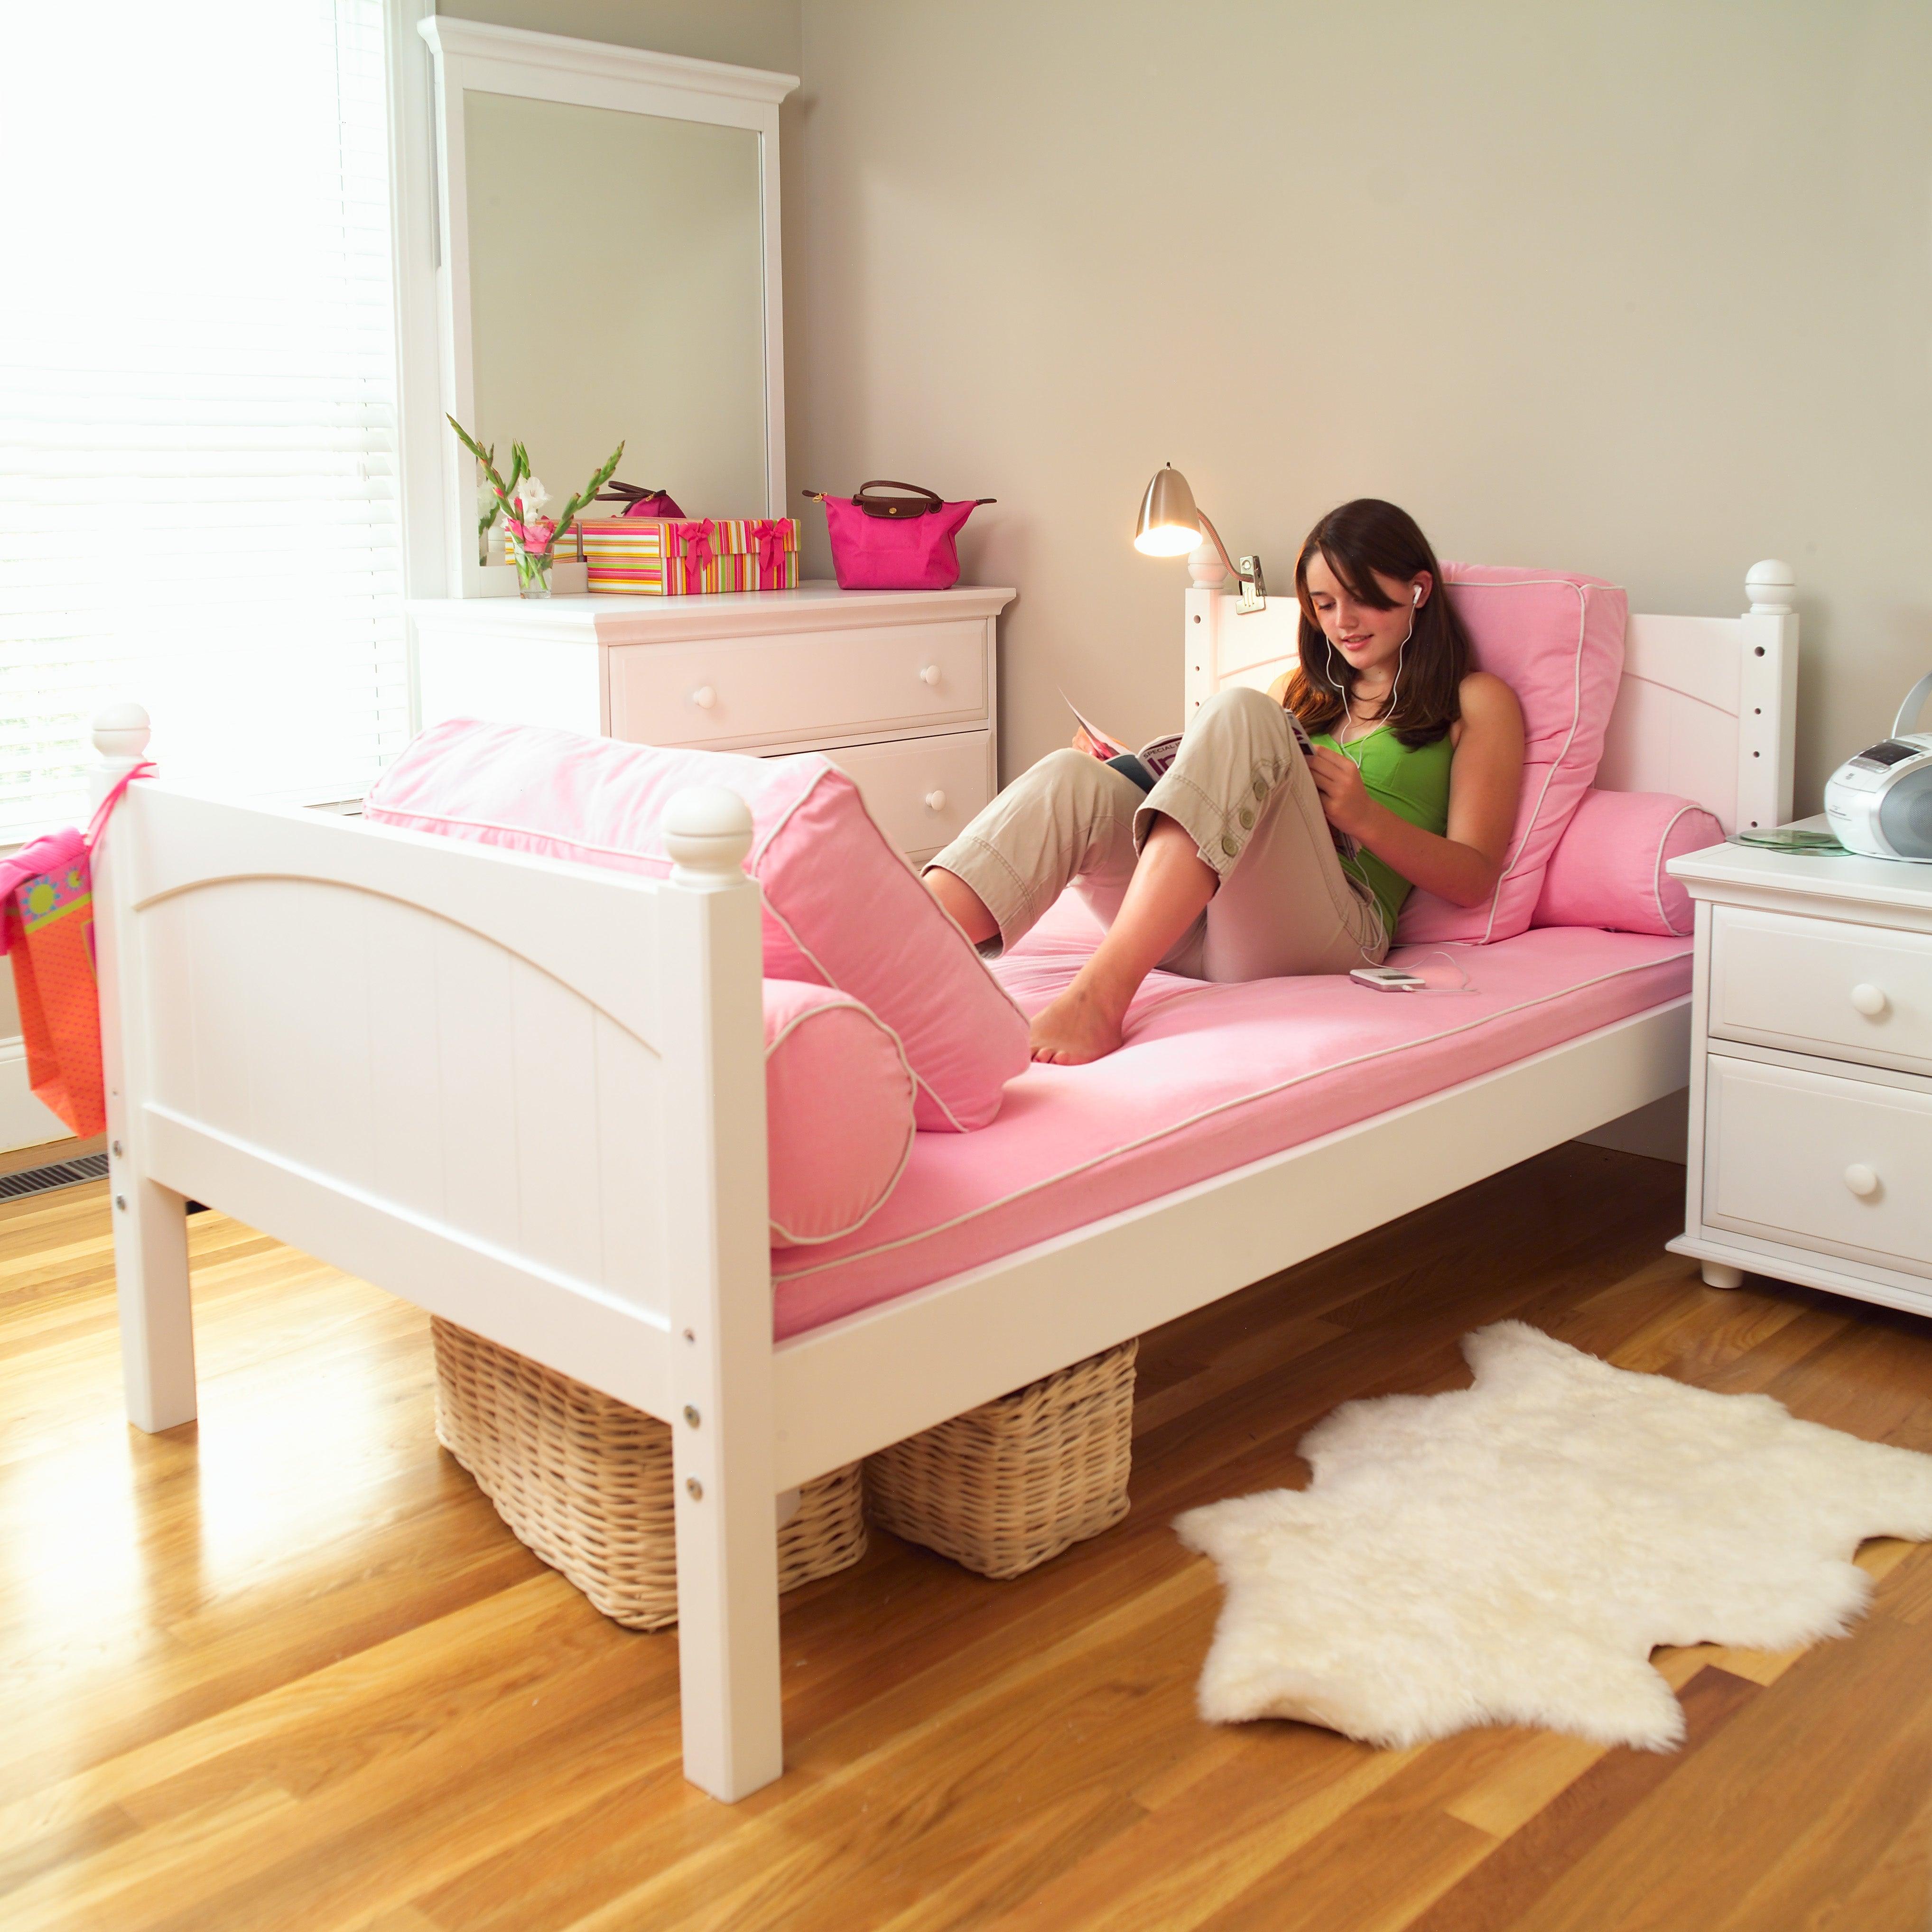 Maxtrix Basic Low Bed (w Pullout options) - Kids Haven